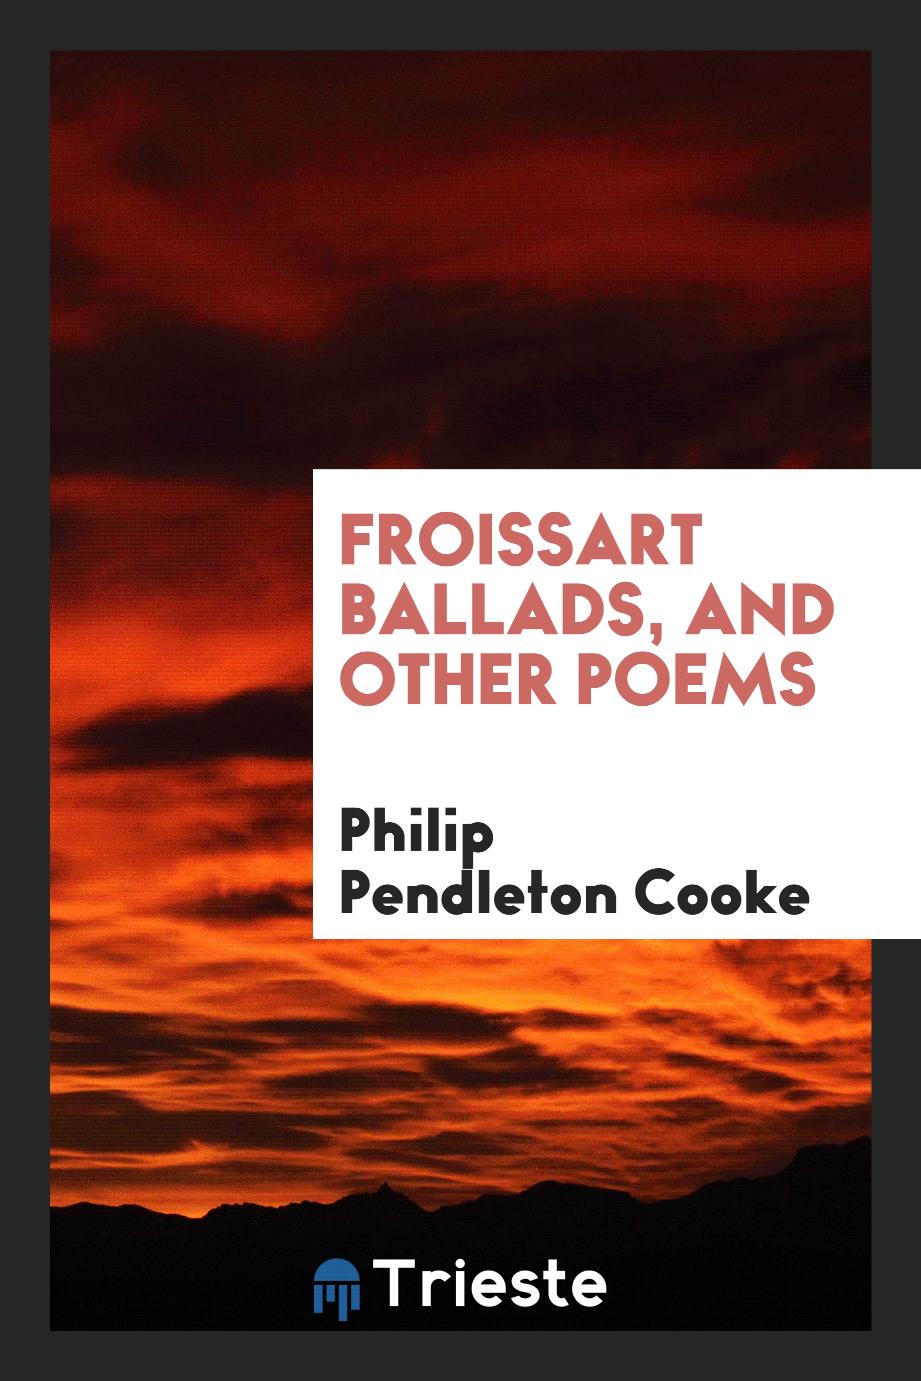 Froissart Ballads, and Other Poems